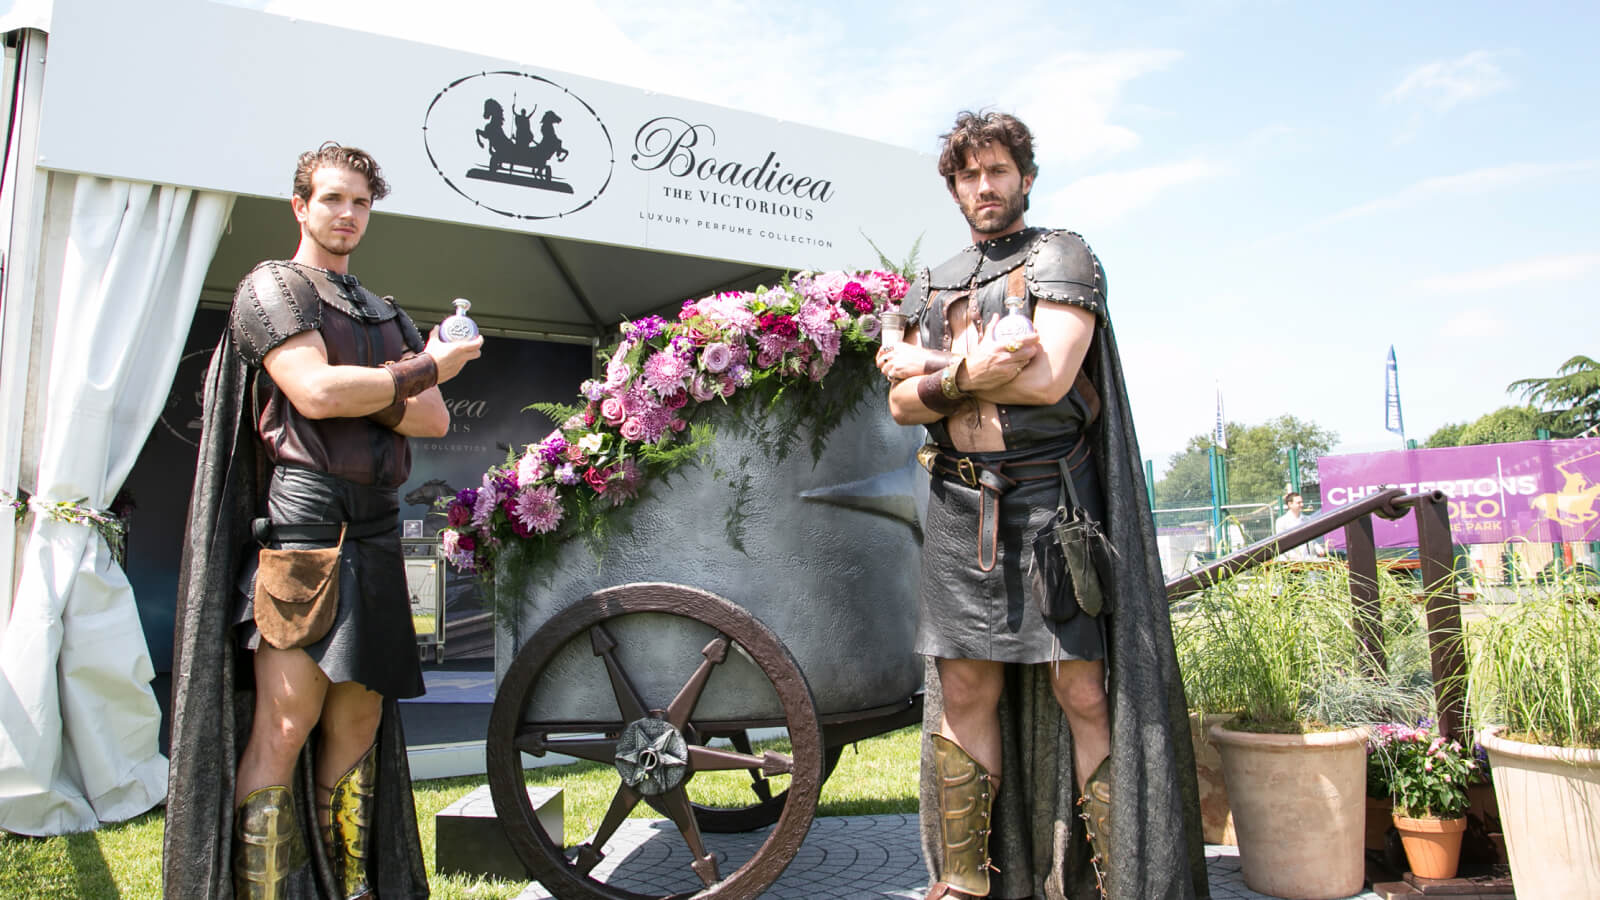 Boadicea's new Fortitude makes the headlines at this year's Polo in the Park